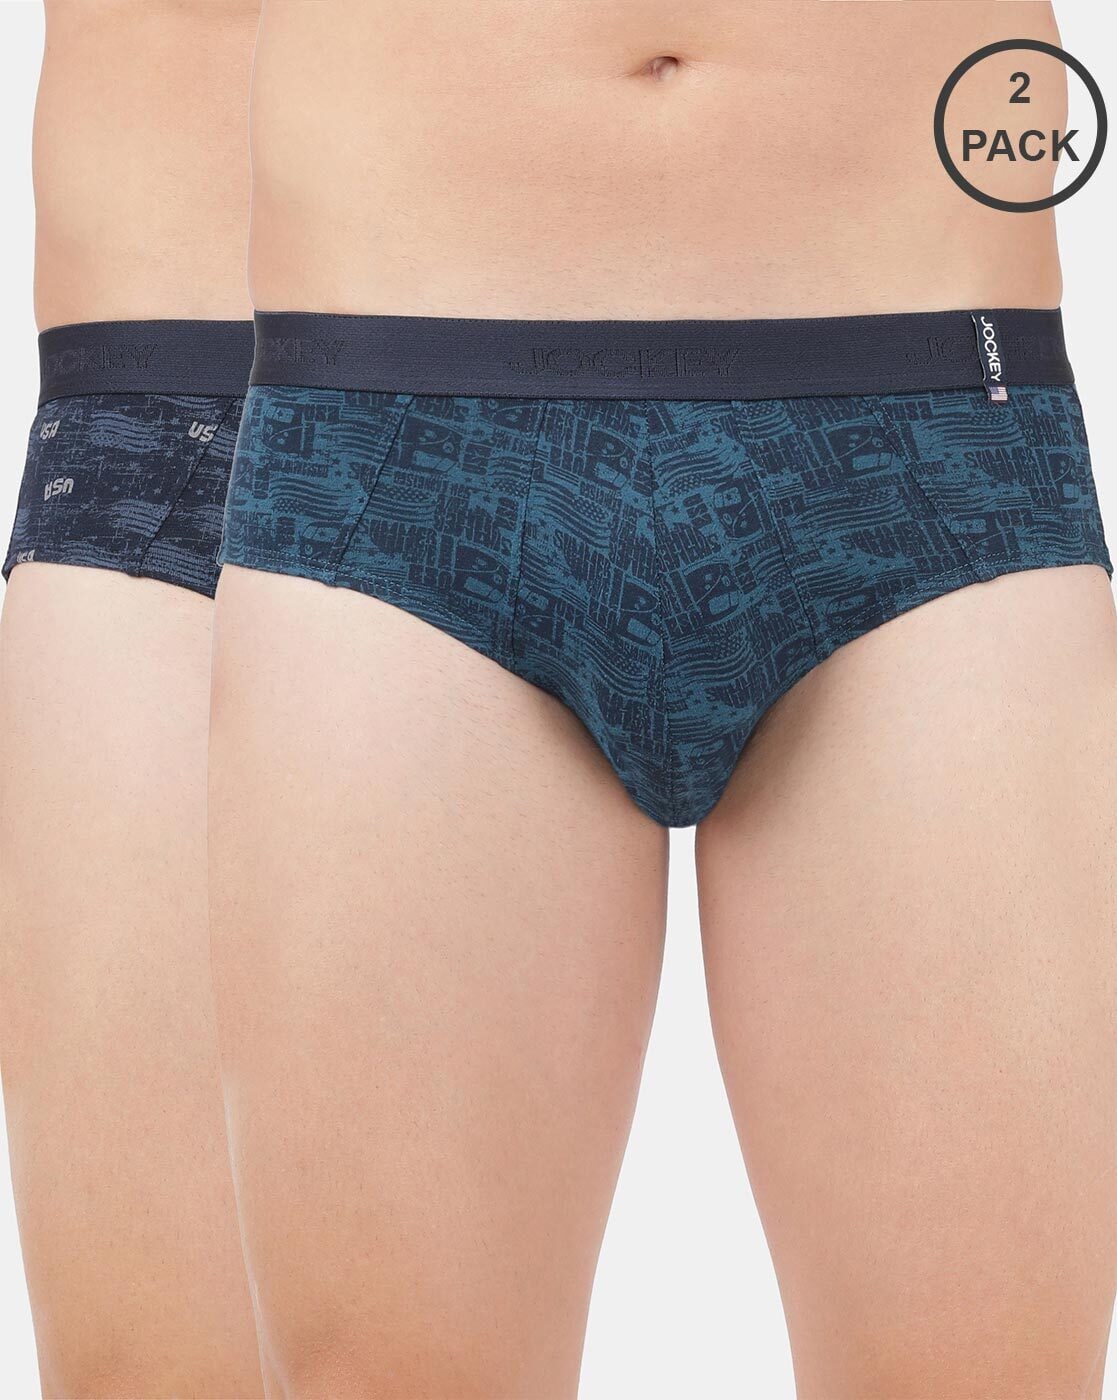 Pack of 2 Printed Briefs with Elasticated Waistband